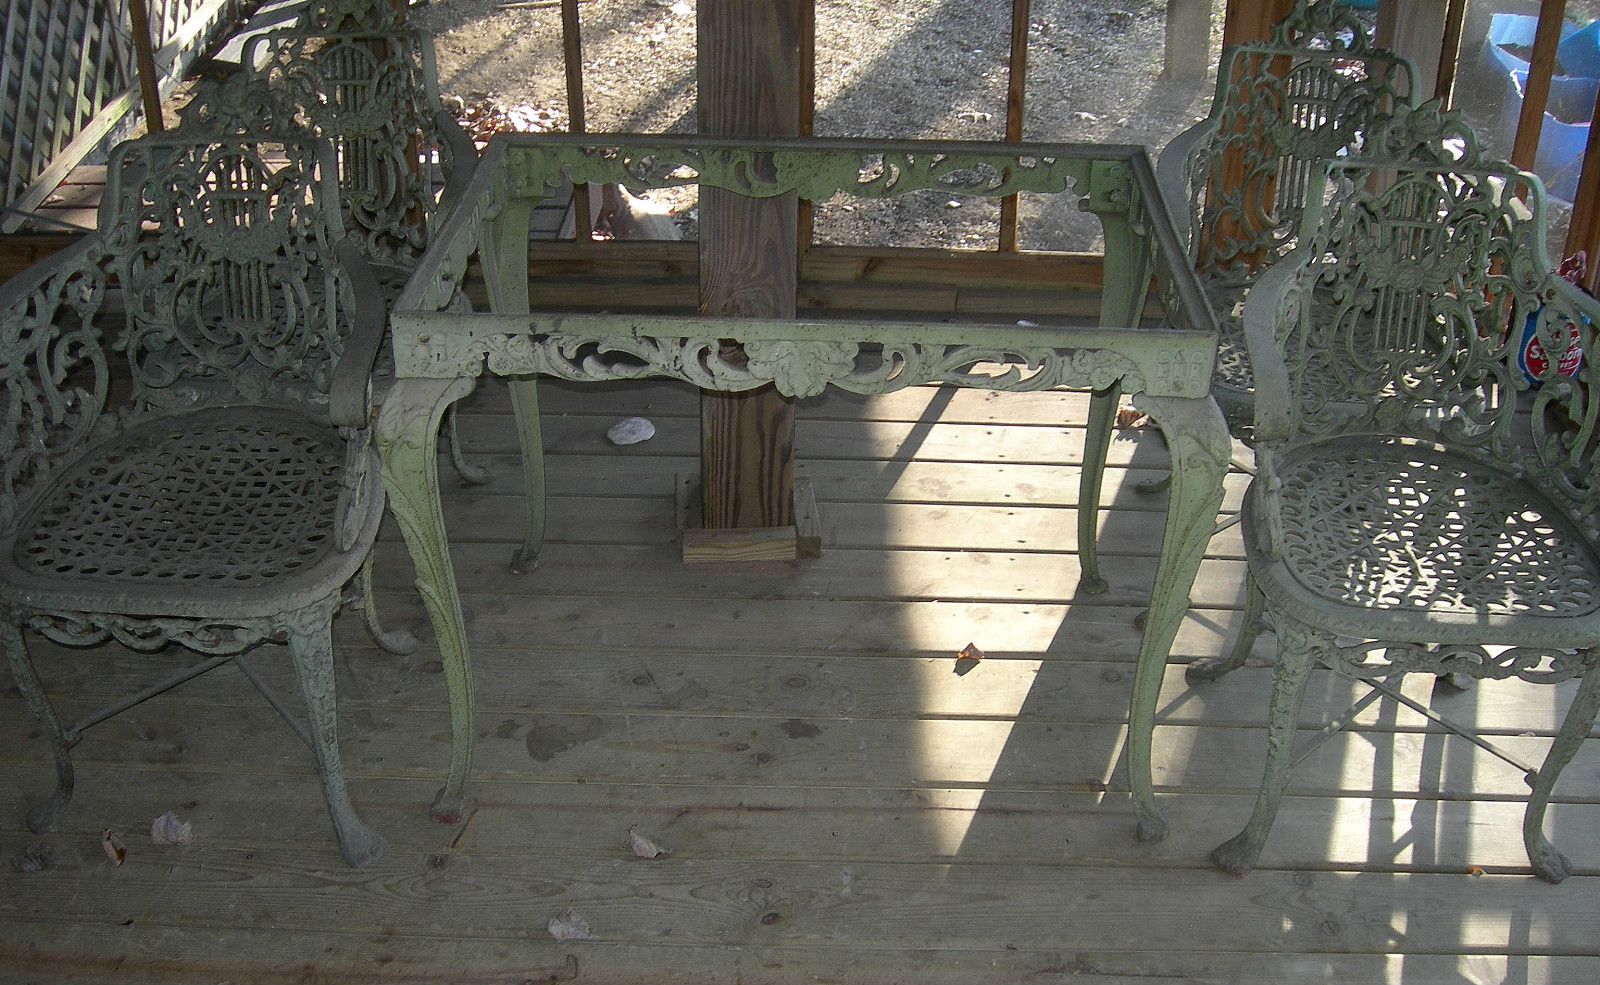 Cast Iron Lawn Chairs 1840's 1850's Beautiful and A Cast Iron Table